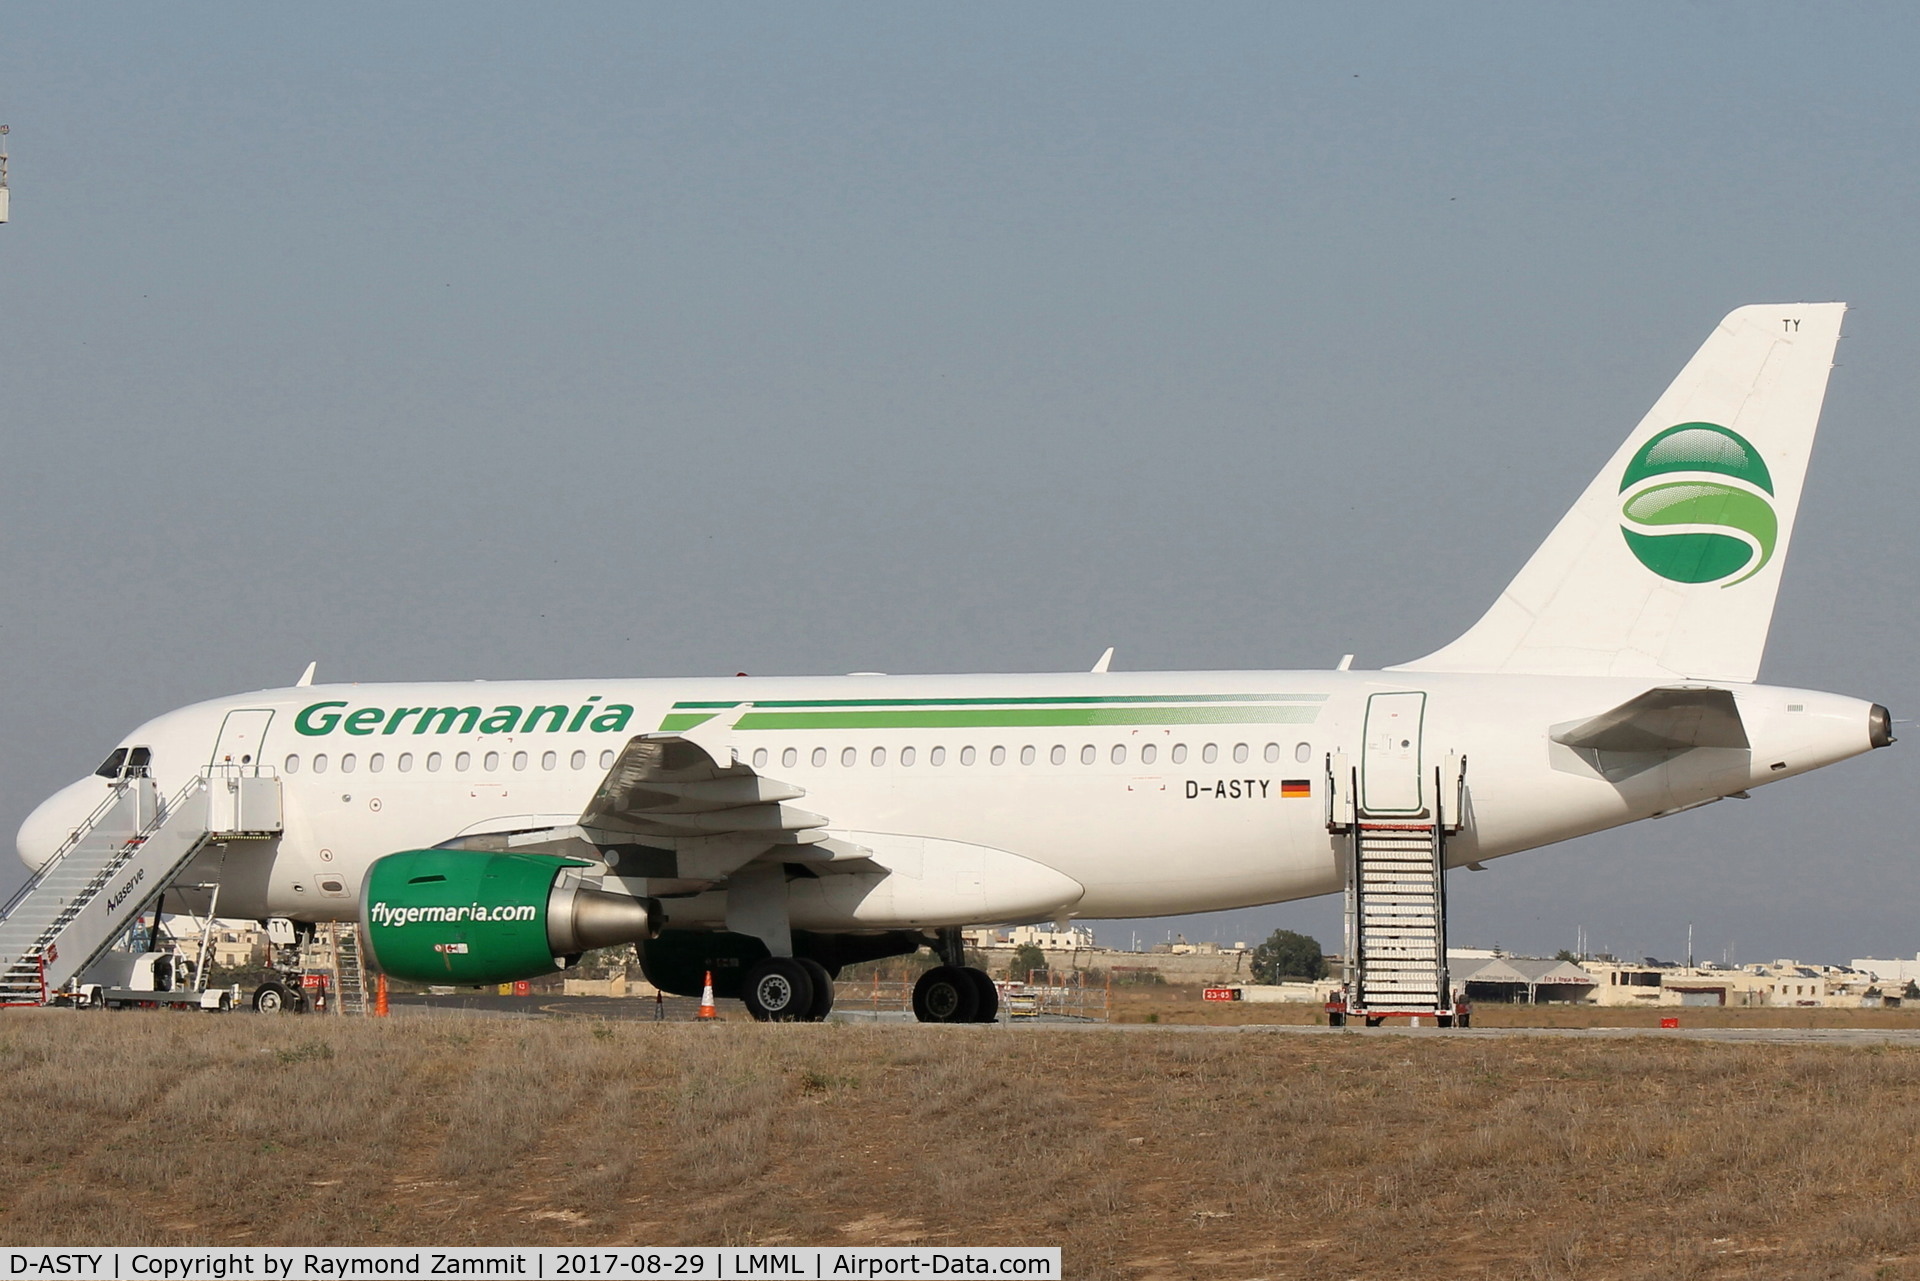 D-ASTY, 2008 Airbus A319-112 C/N 3407, A319 D-ASTY Germania